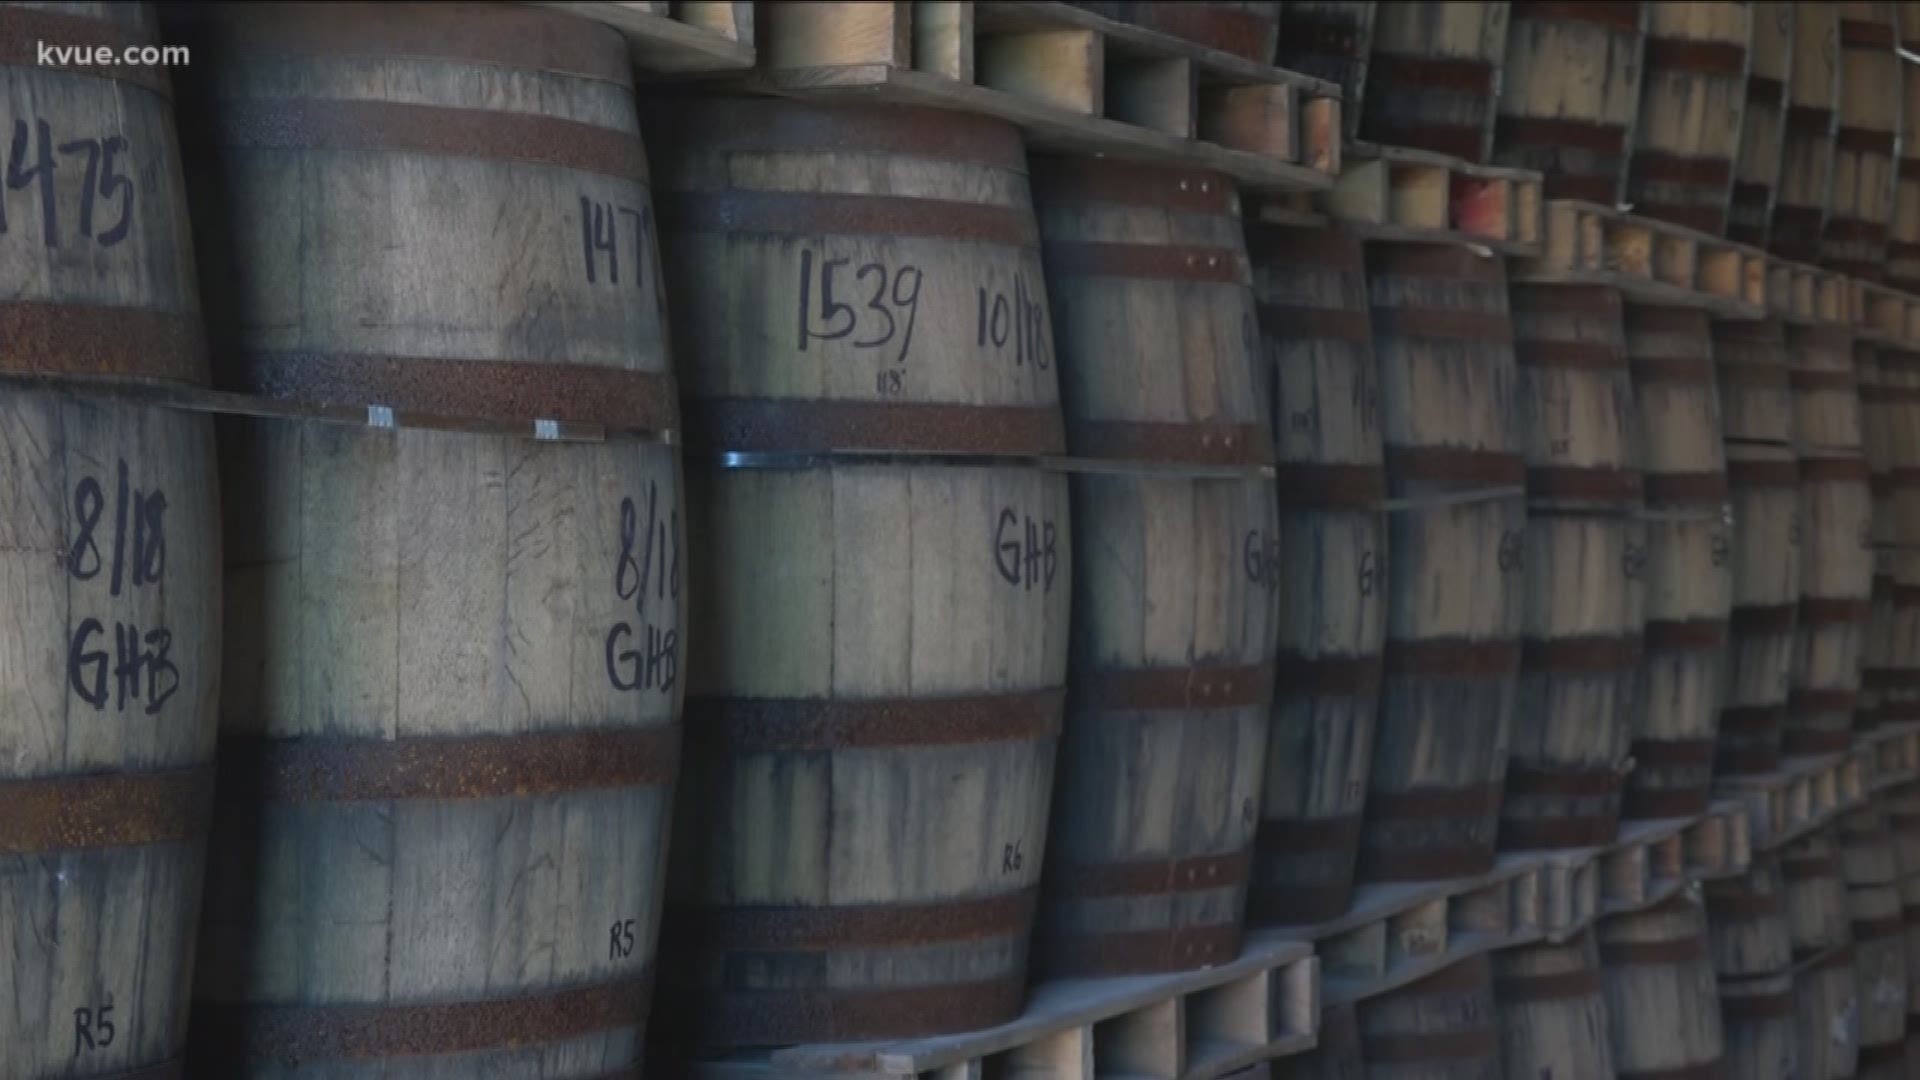 There are more distilleries in Central Texas than ever – but if President Trump doesn't sign a new spending package, they may lose an important tax break.